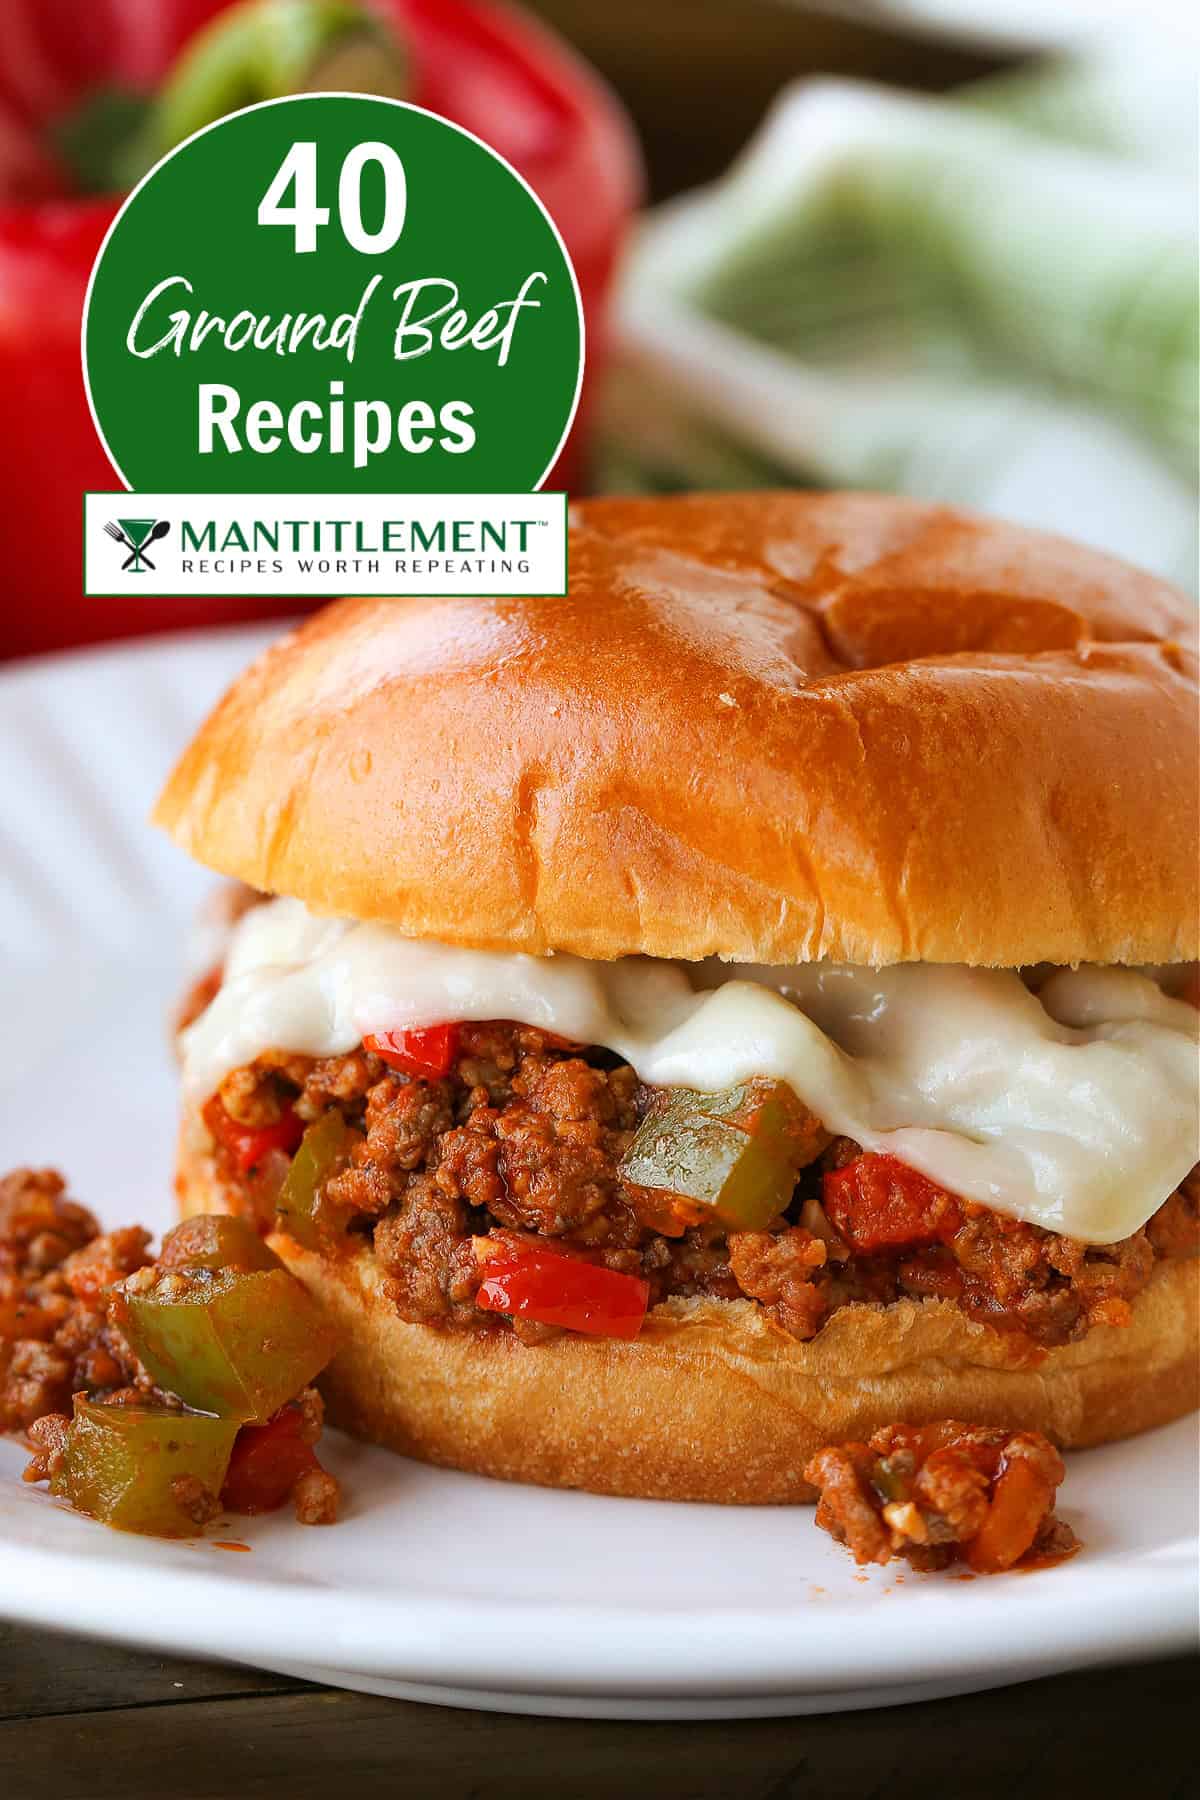 sloppy joe with cheese for ground beef recipe round up